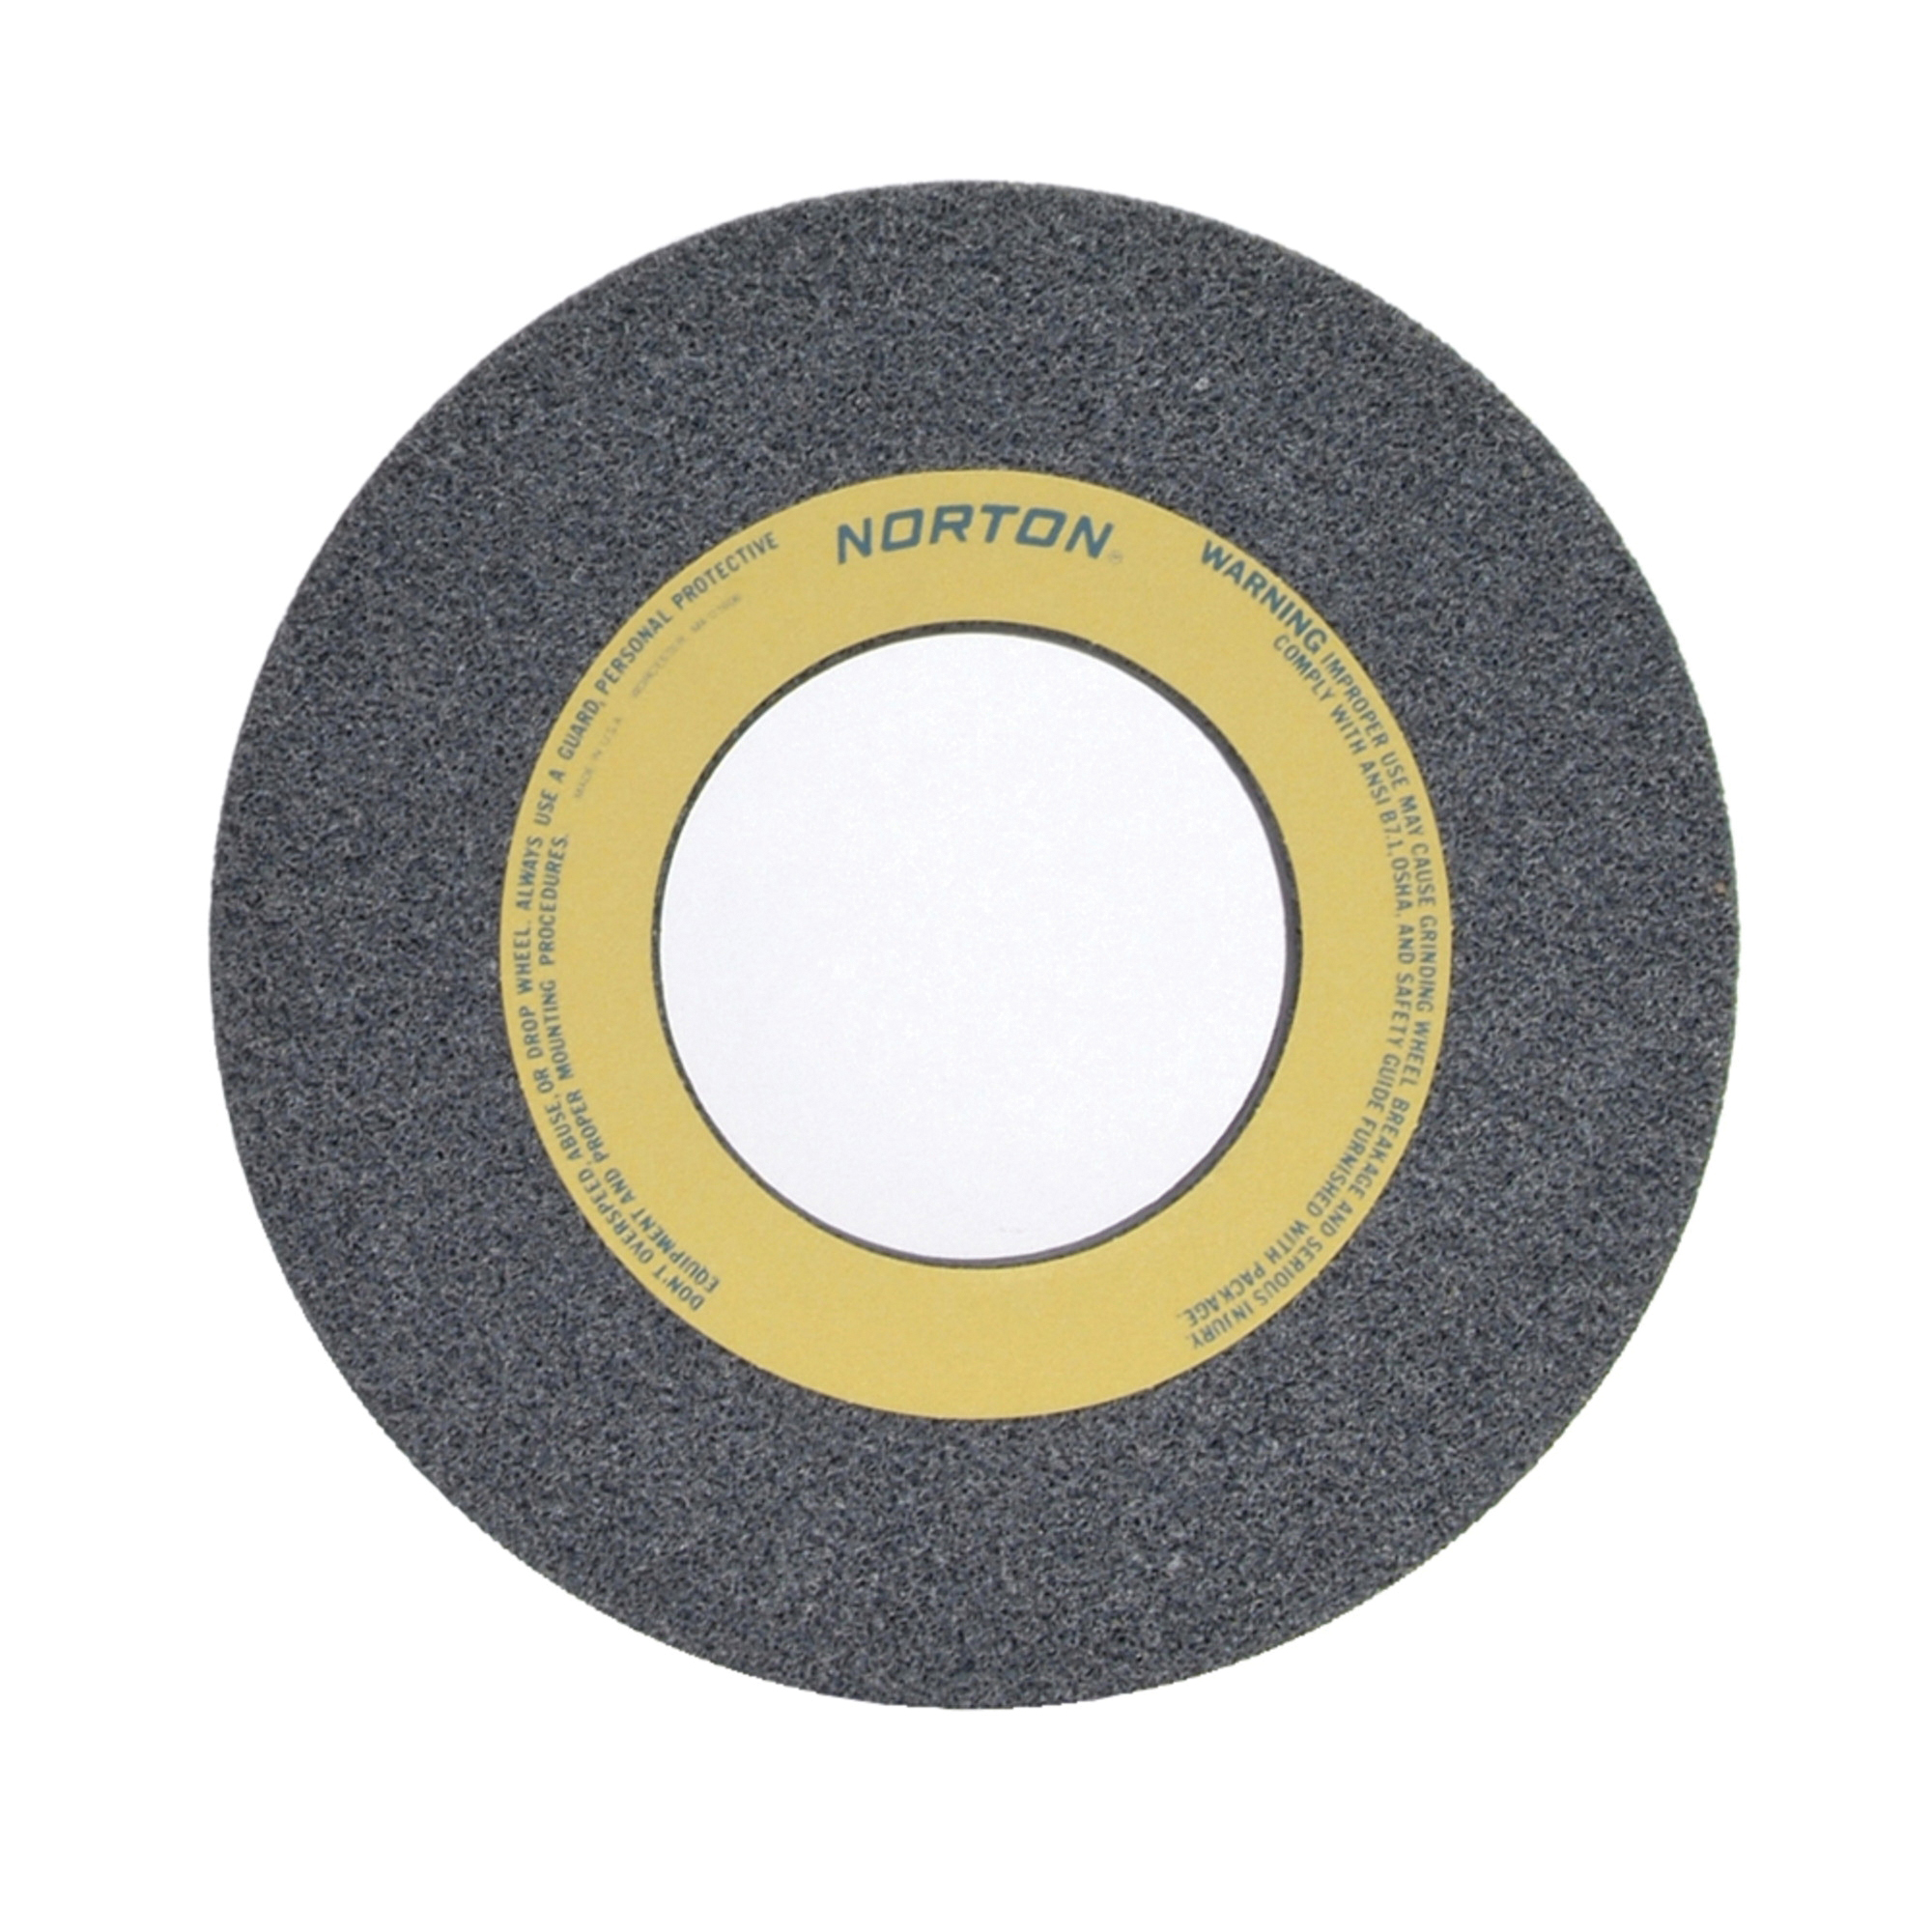 Norton® 66253364239 32A Straight Toolroom Wheel, 14 in Dia x 1-1/2 in THK, 5 in Center Hole, 60 Grit, Aluminum Oxide Abrasive